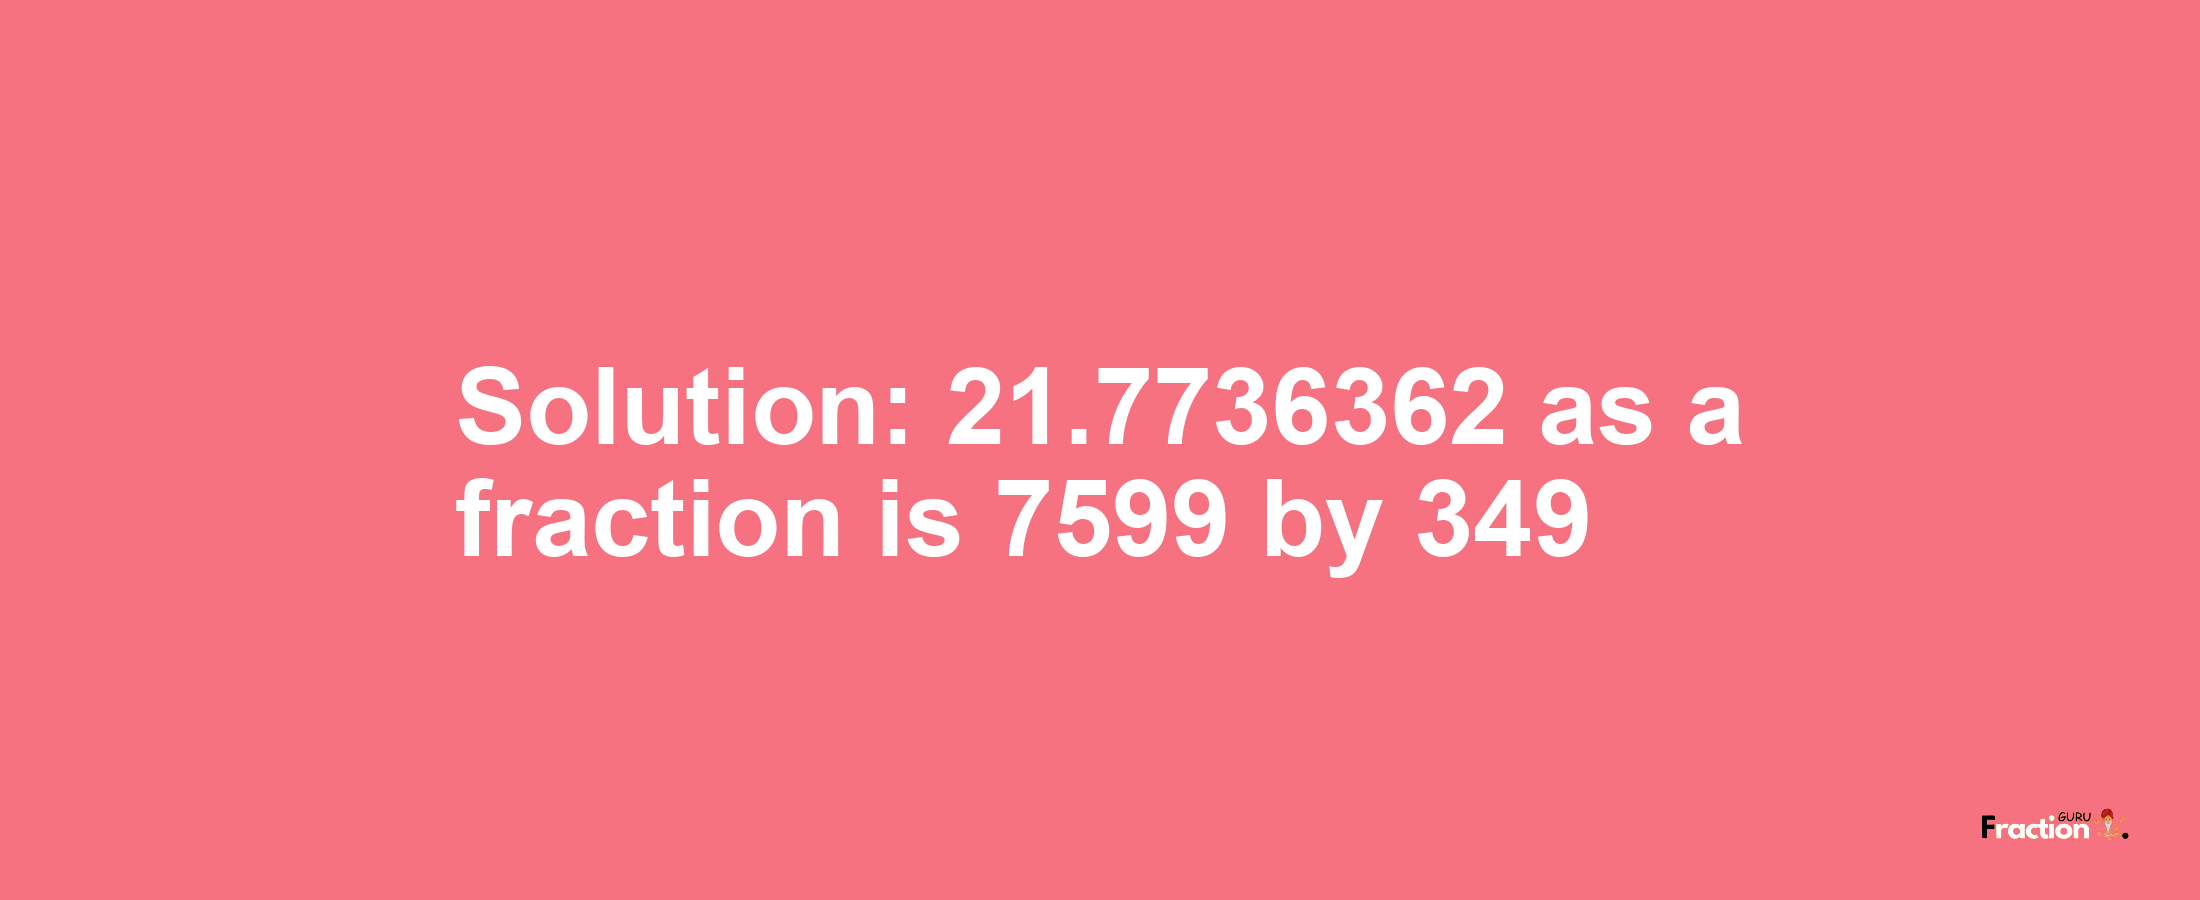 Solution:21.7736362 as a fraction is 7599/349